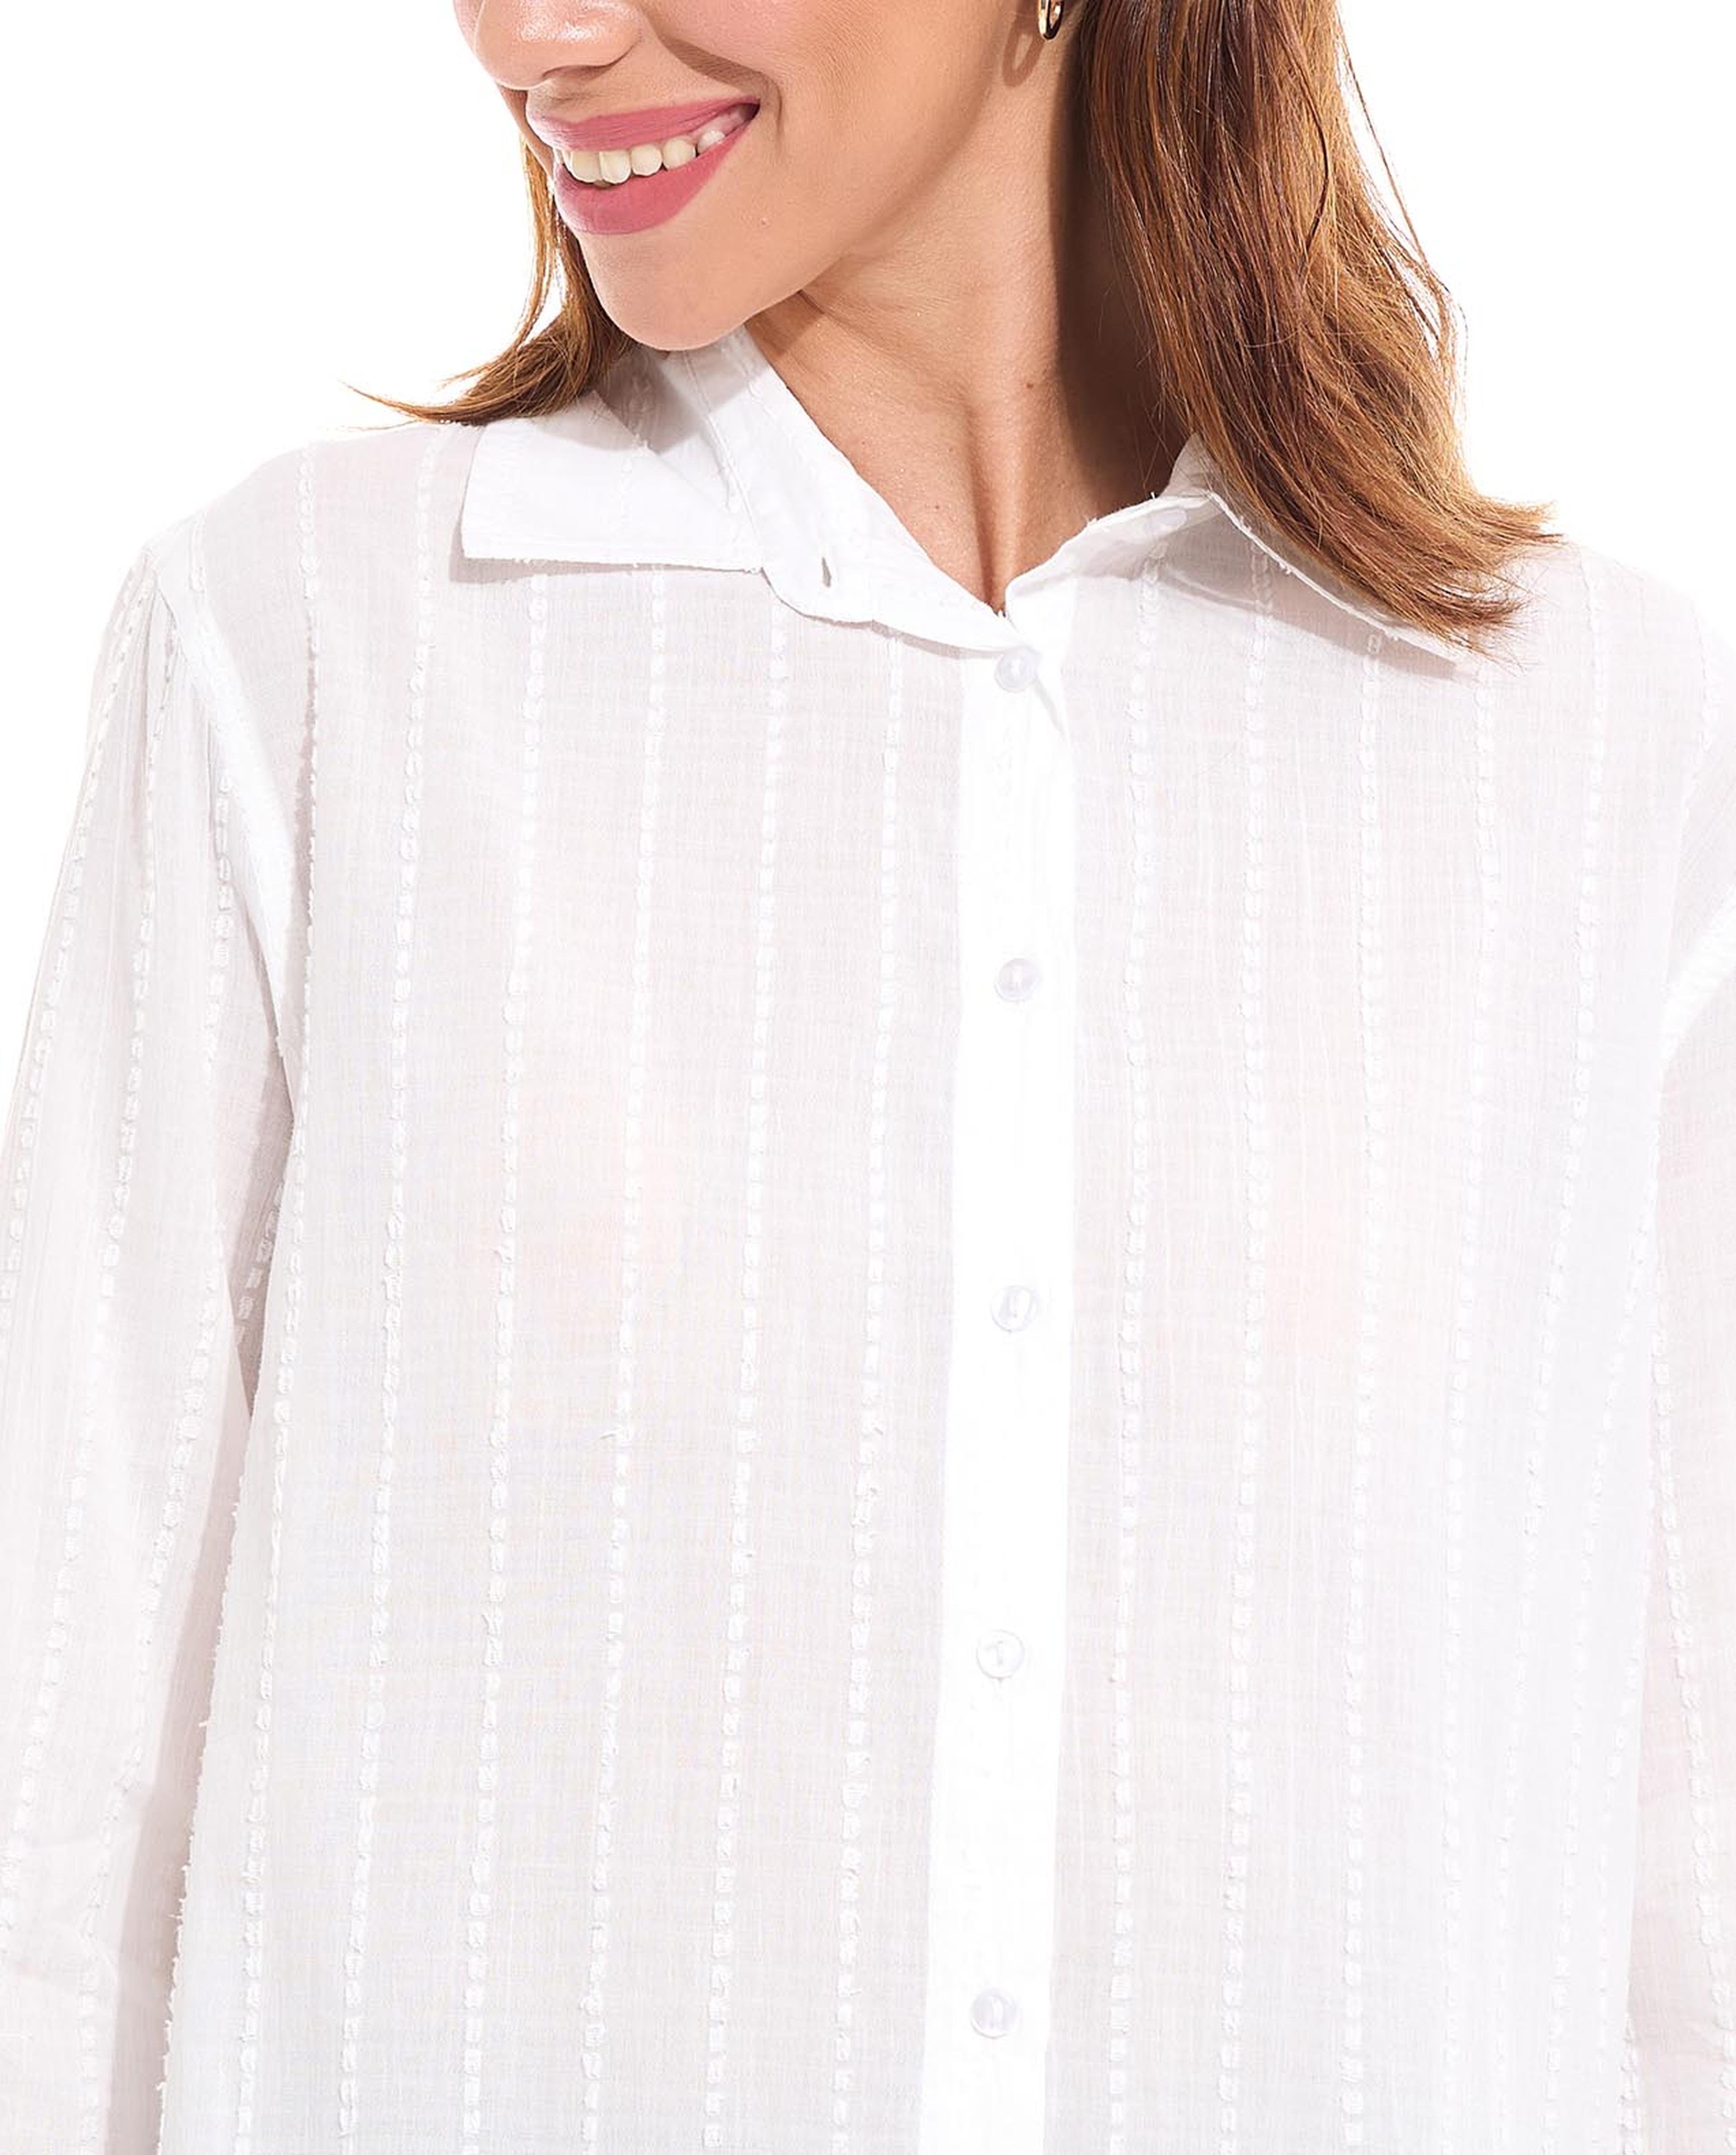 Woven Shirt with Classic Collar and Long Sleeves